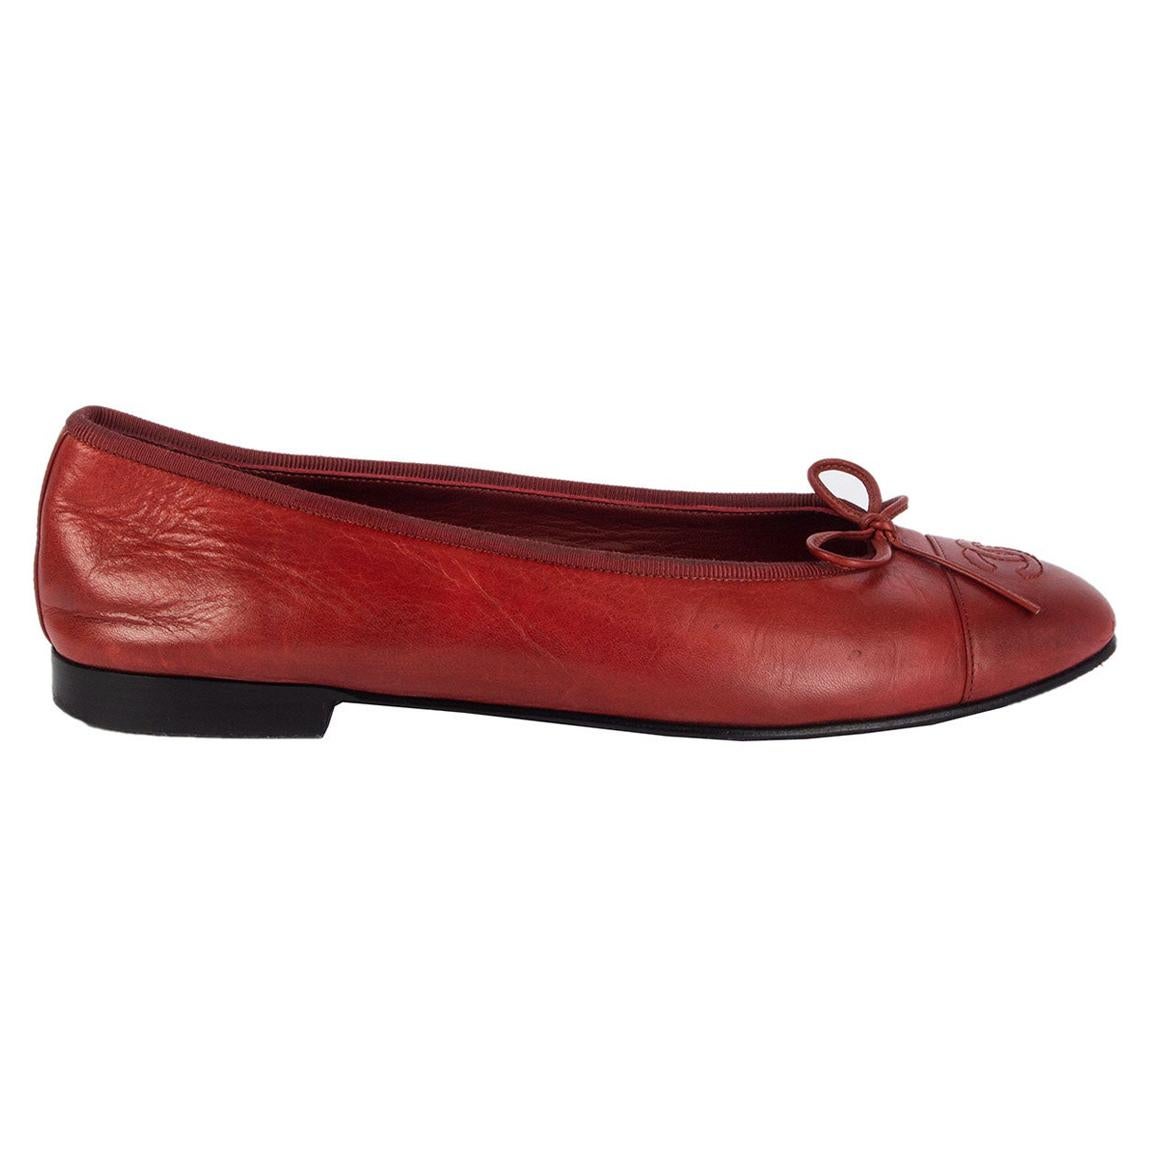 CHANEL brick red leather w FAUX PATINA Ballet Flats Shoes 39